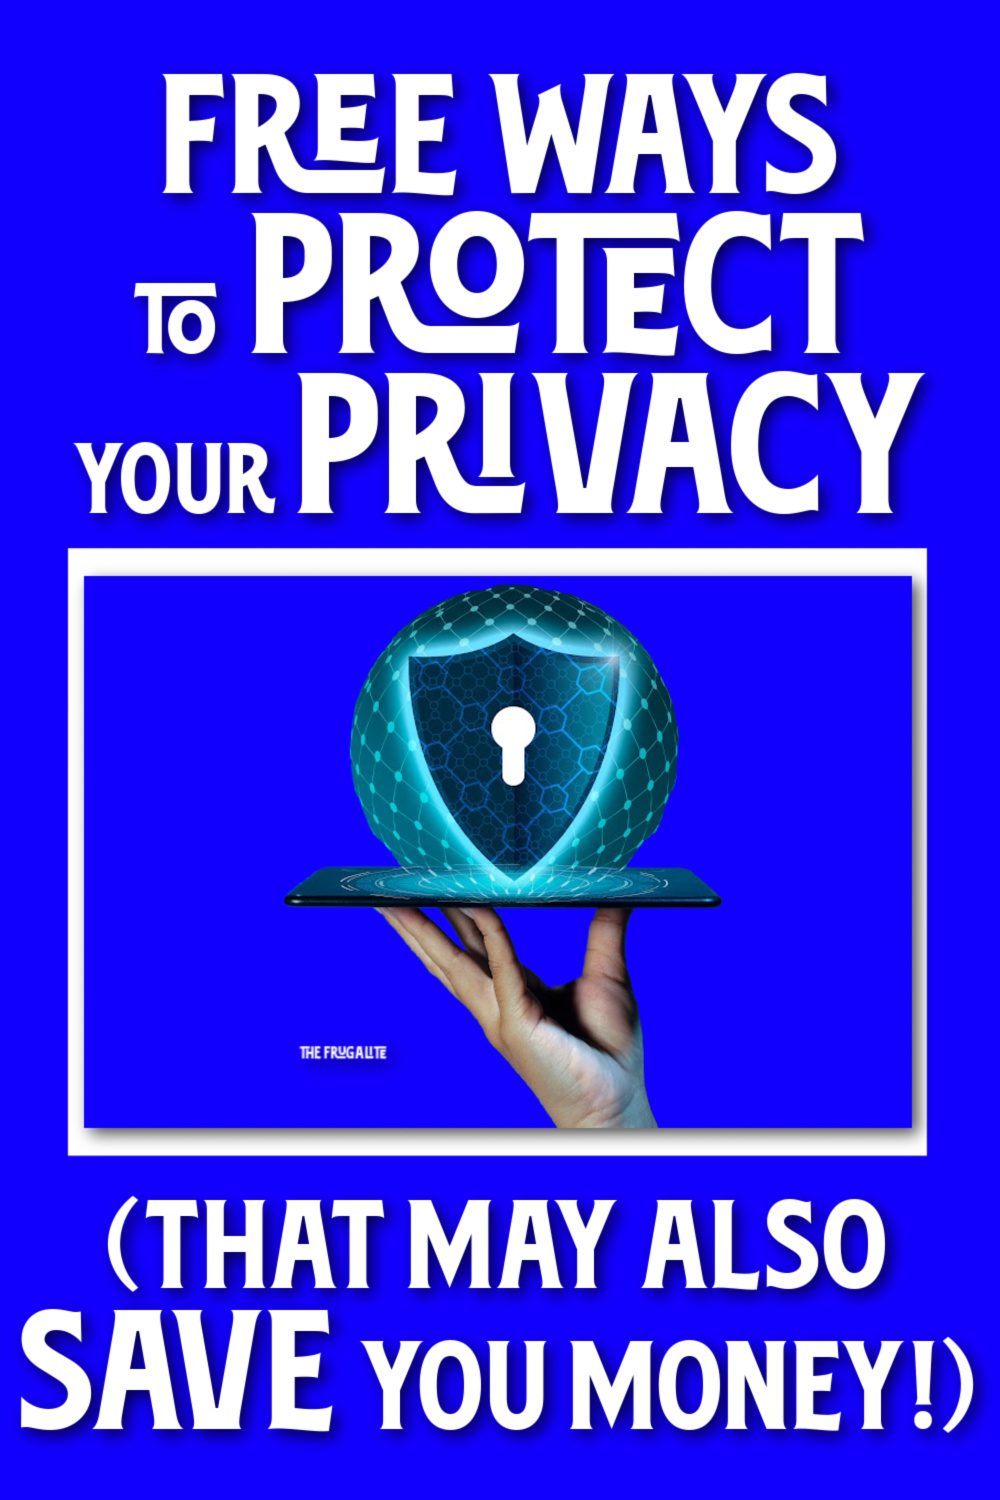 Free Ways to Protect Your Privacy (That May SAVE You Money!)